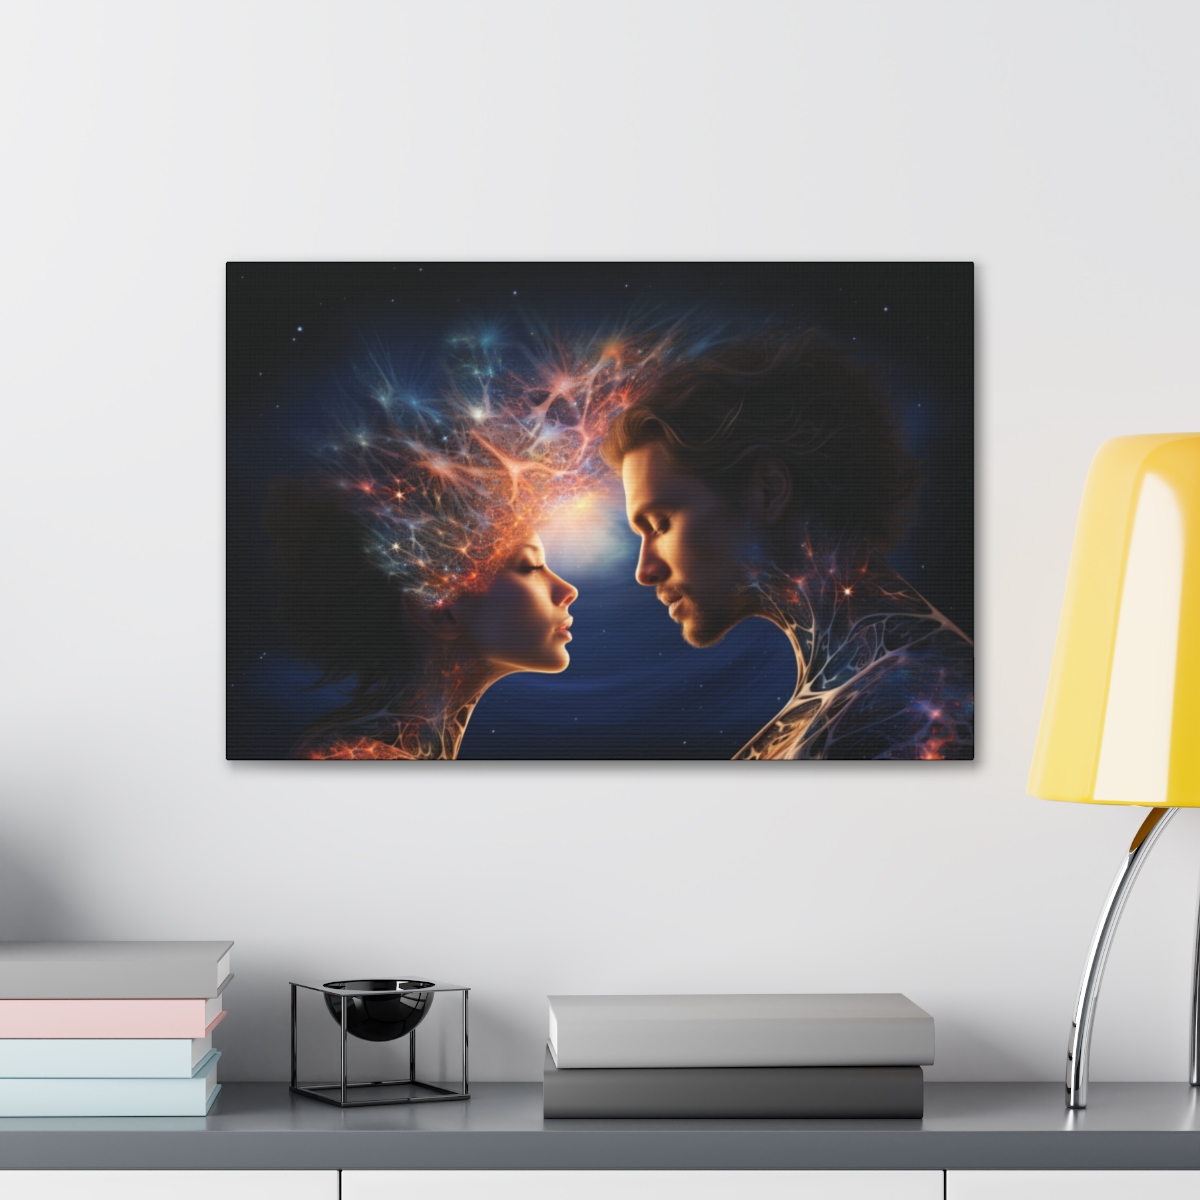 Spiritual Twin Flame Art Canvas Print: Where Have You Been All My Life?